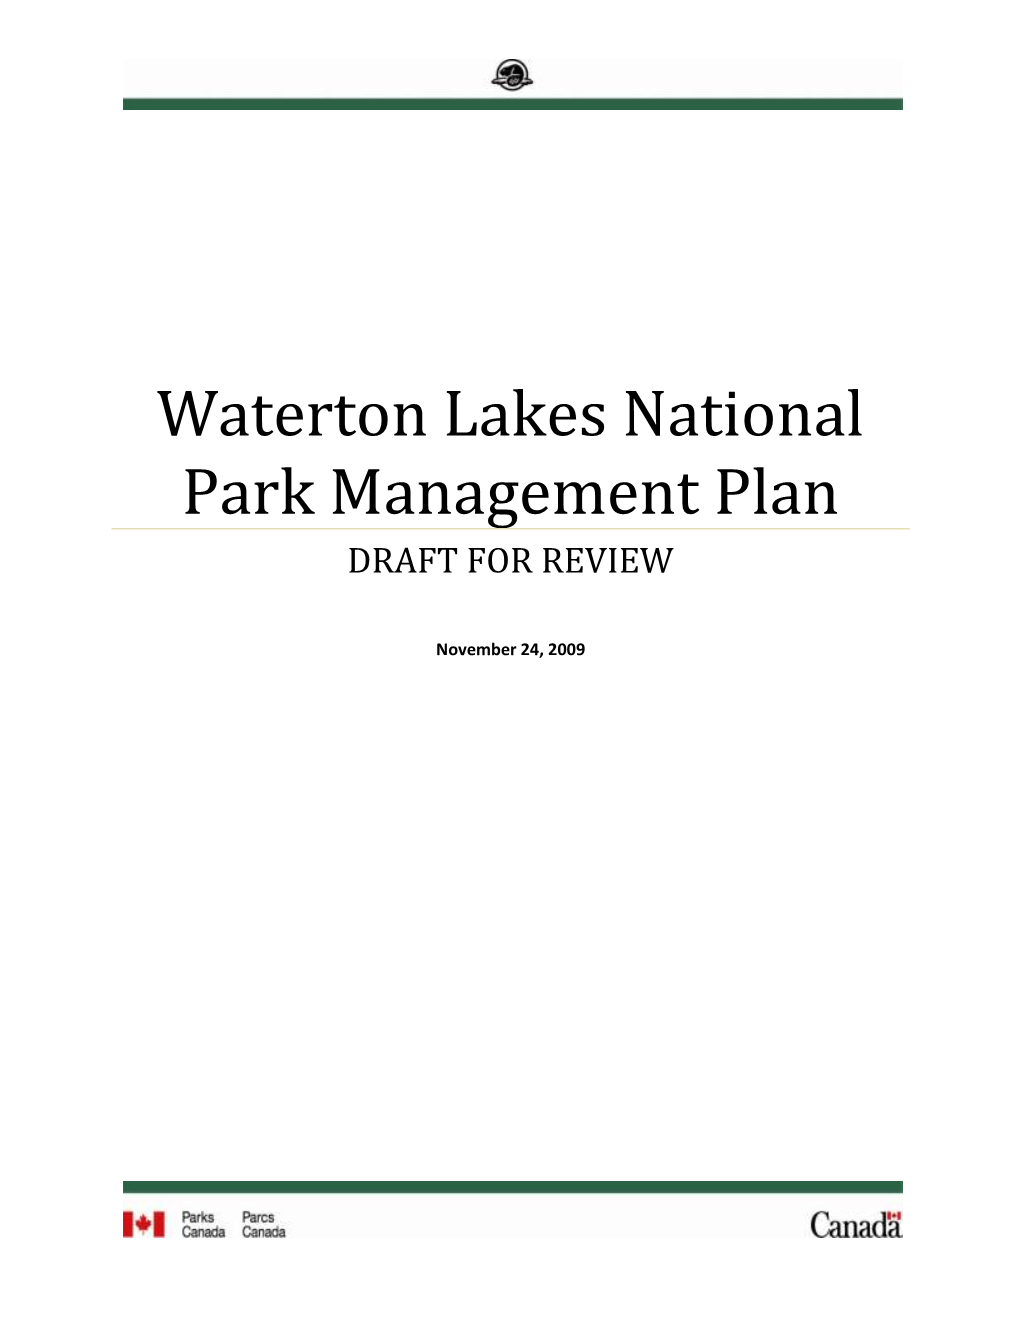 Waterton Lakes National Park Management Plan DRAFT for REVIEW